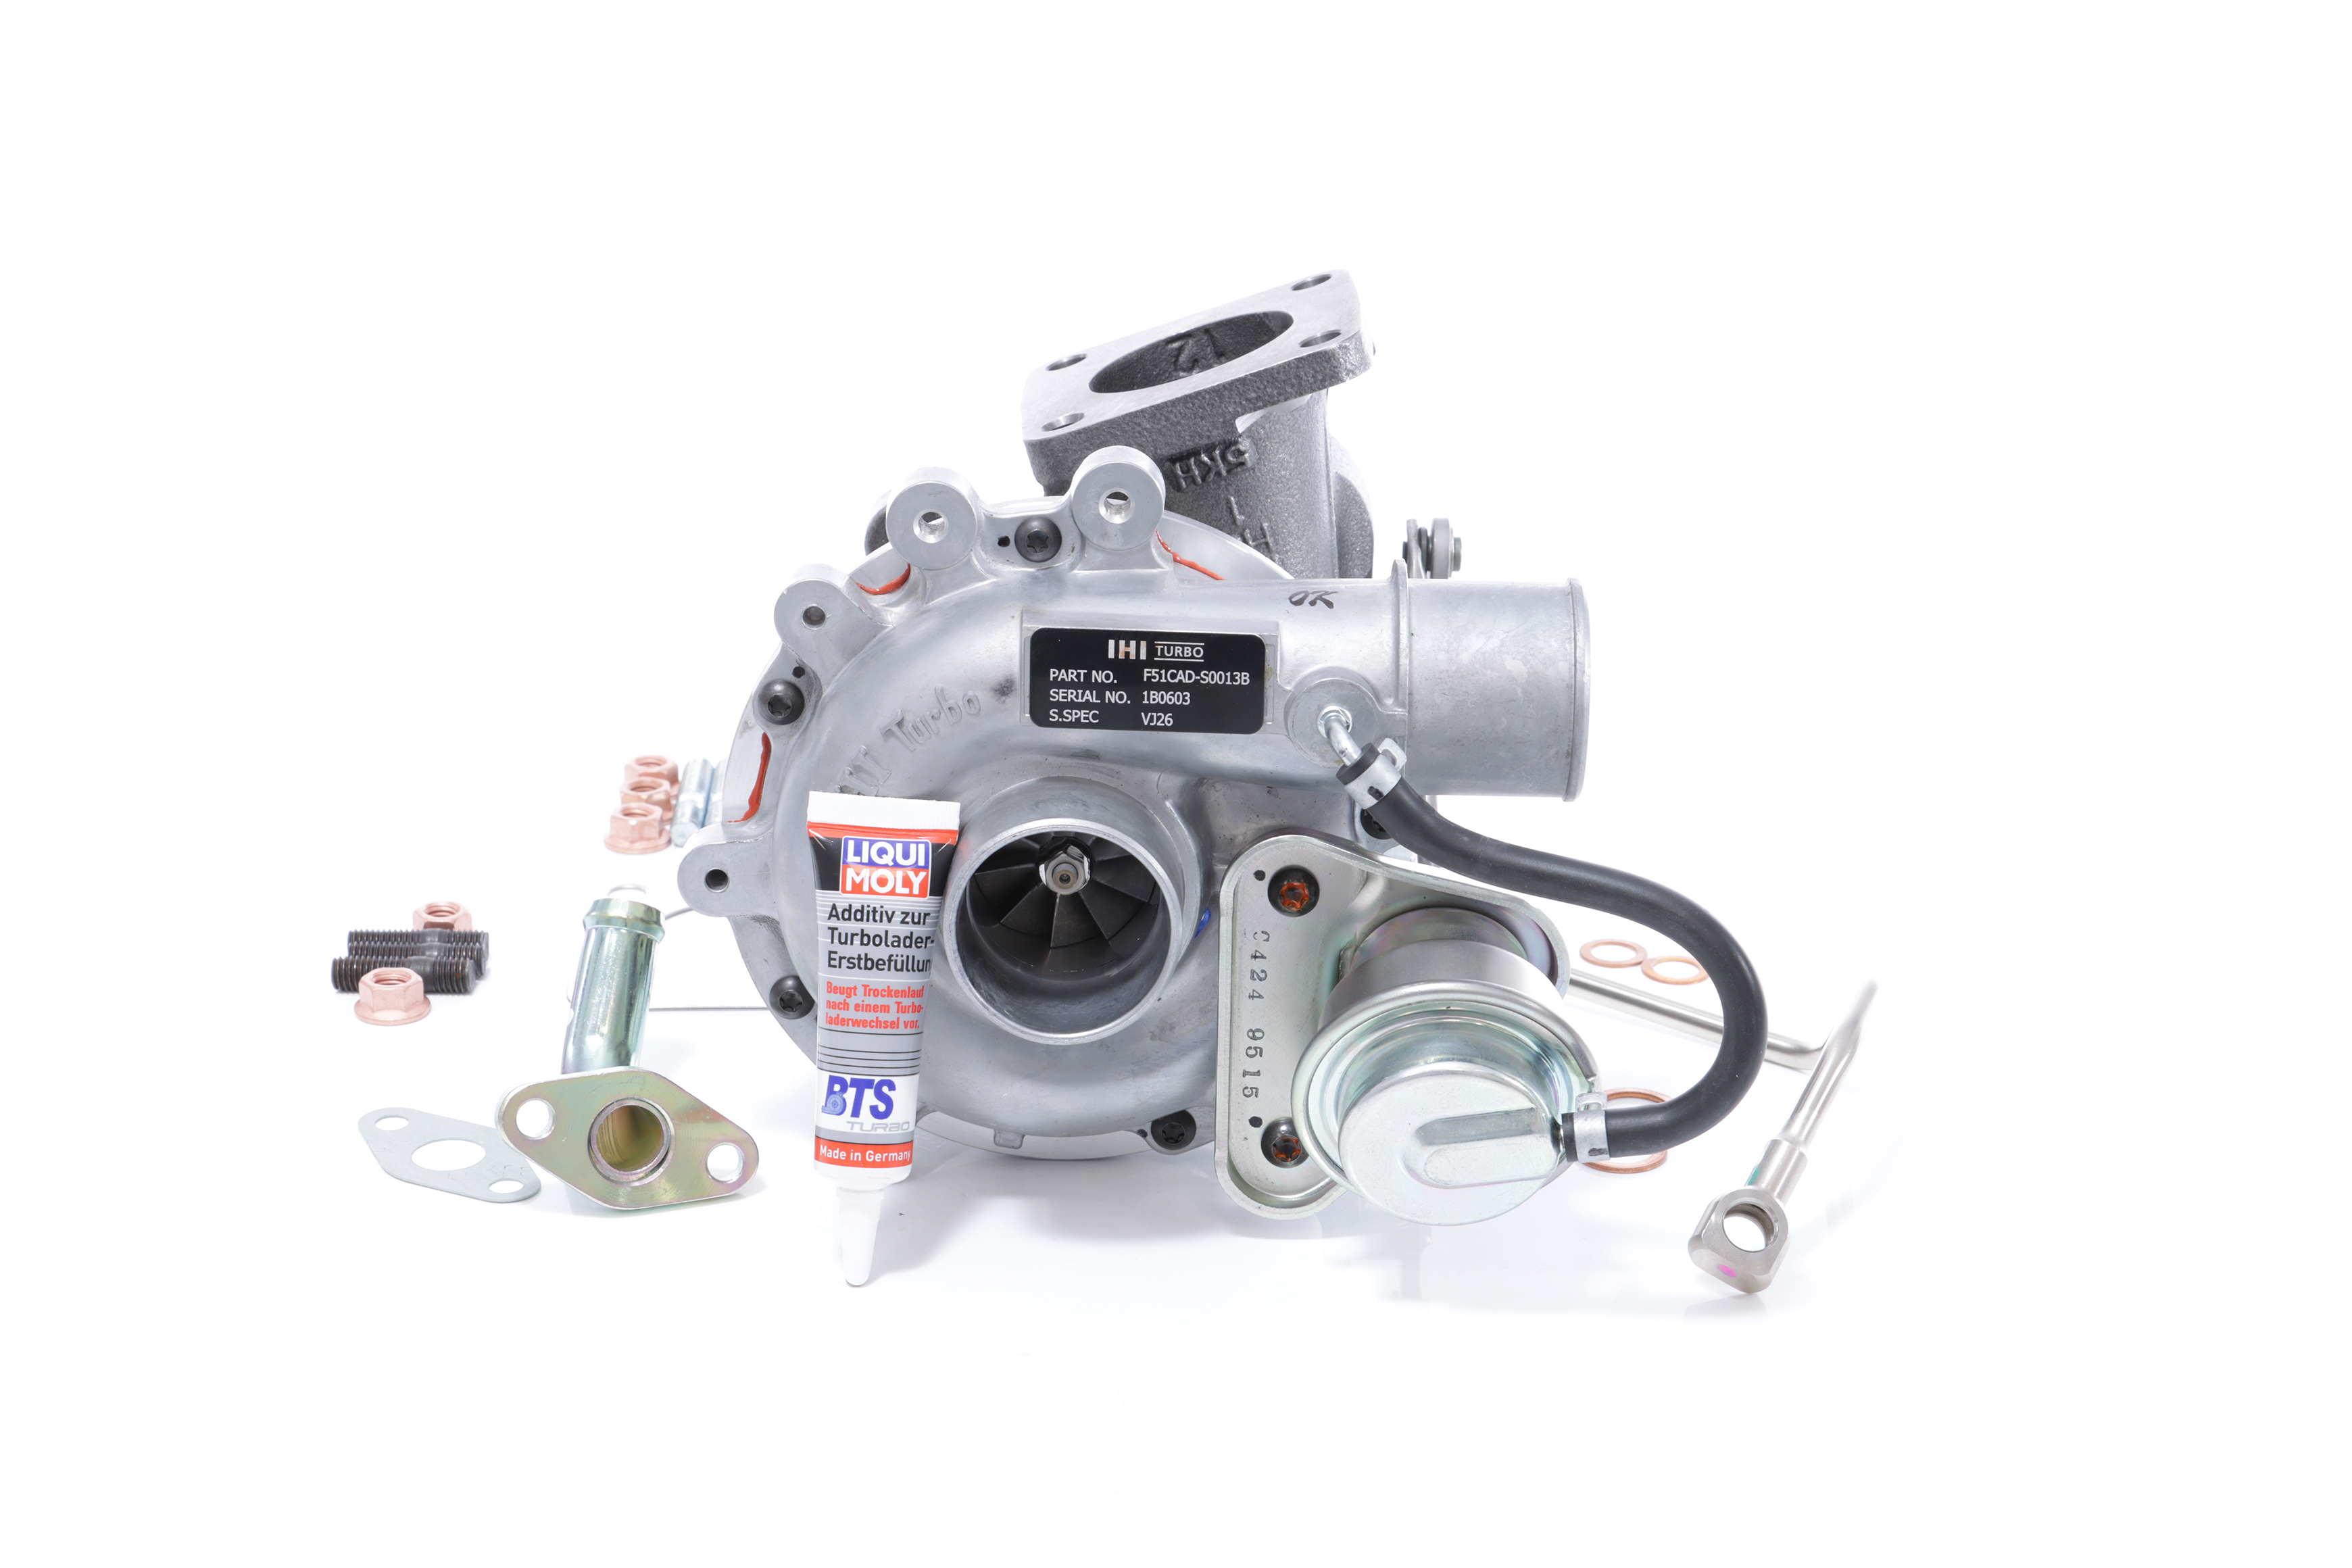 BTS TURBO Exhaust Turbocharger, Euro 3 (D3), with oil supply line, with oil drain line, with attachment material, TURBO SERVICE SET ORIGINAL Turbo T981333 buy